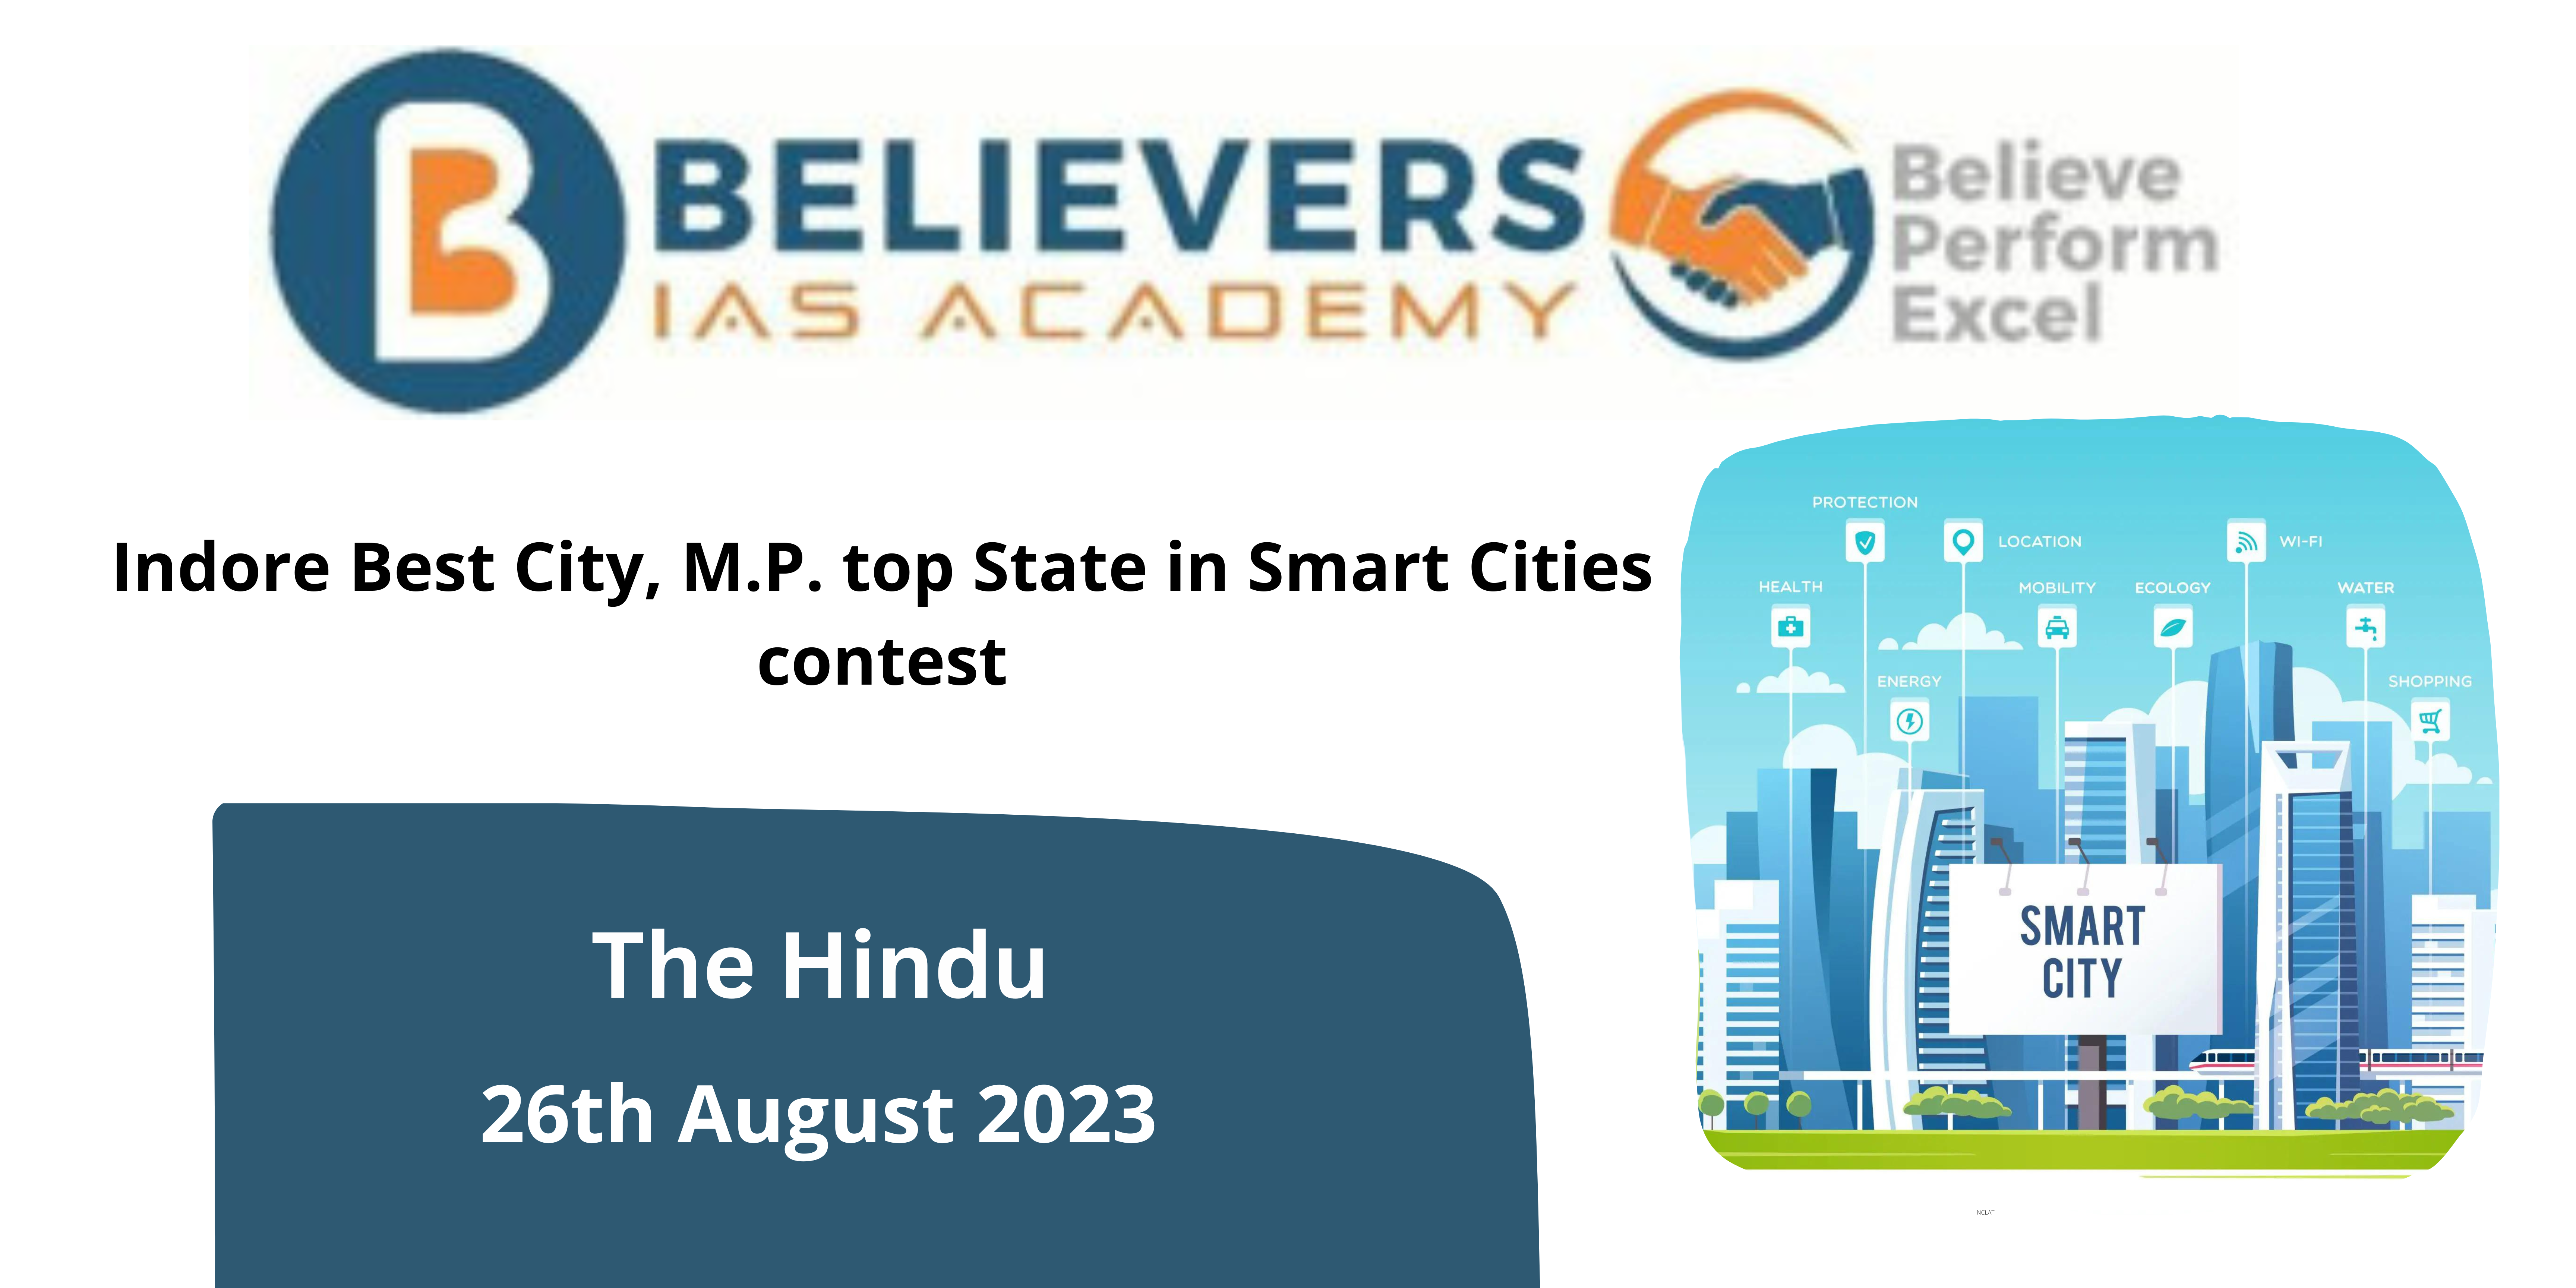 Indore best city, M.P. top State in Smart Cities contest